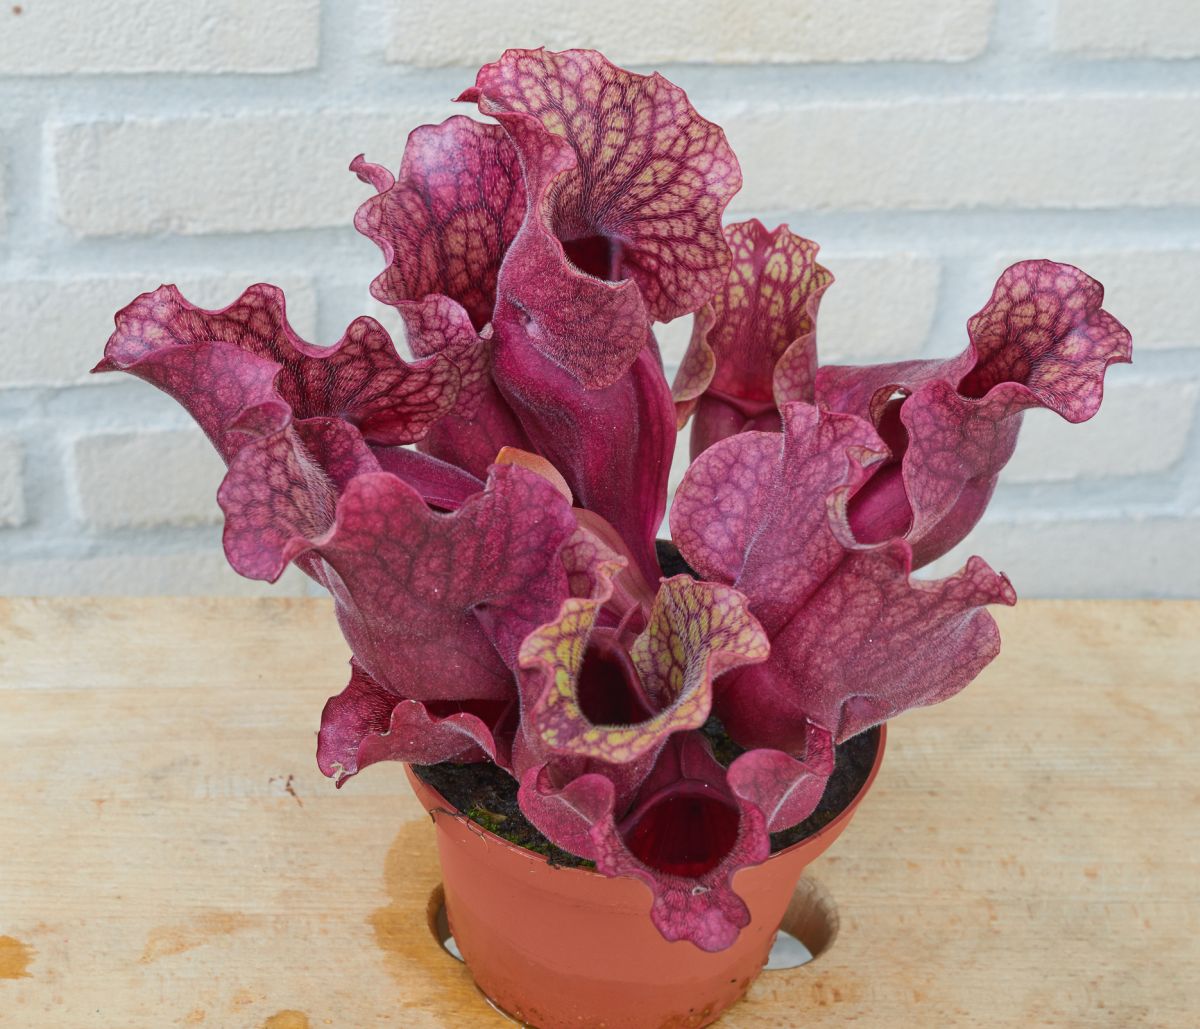 Watering Requirement for the Purple Pitcher Plant